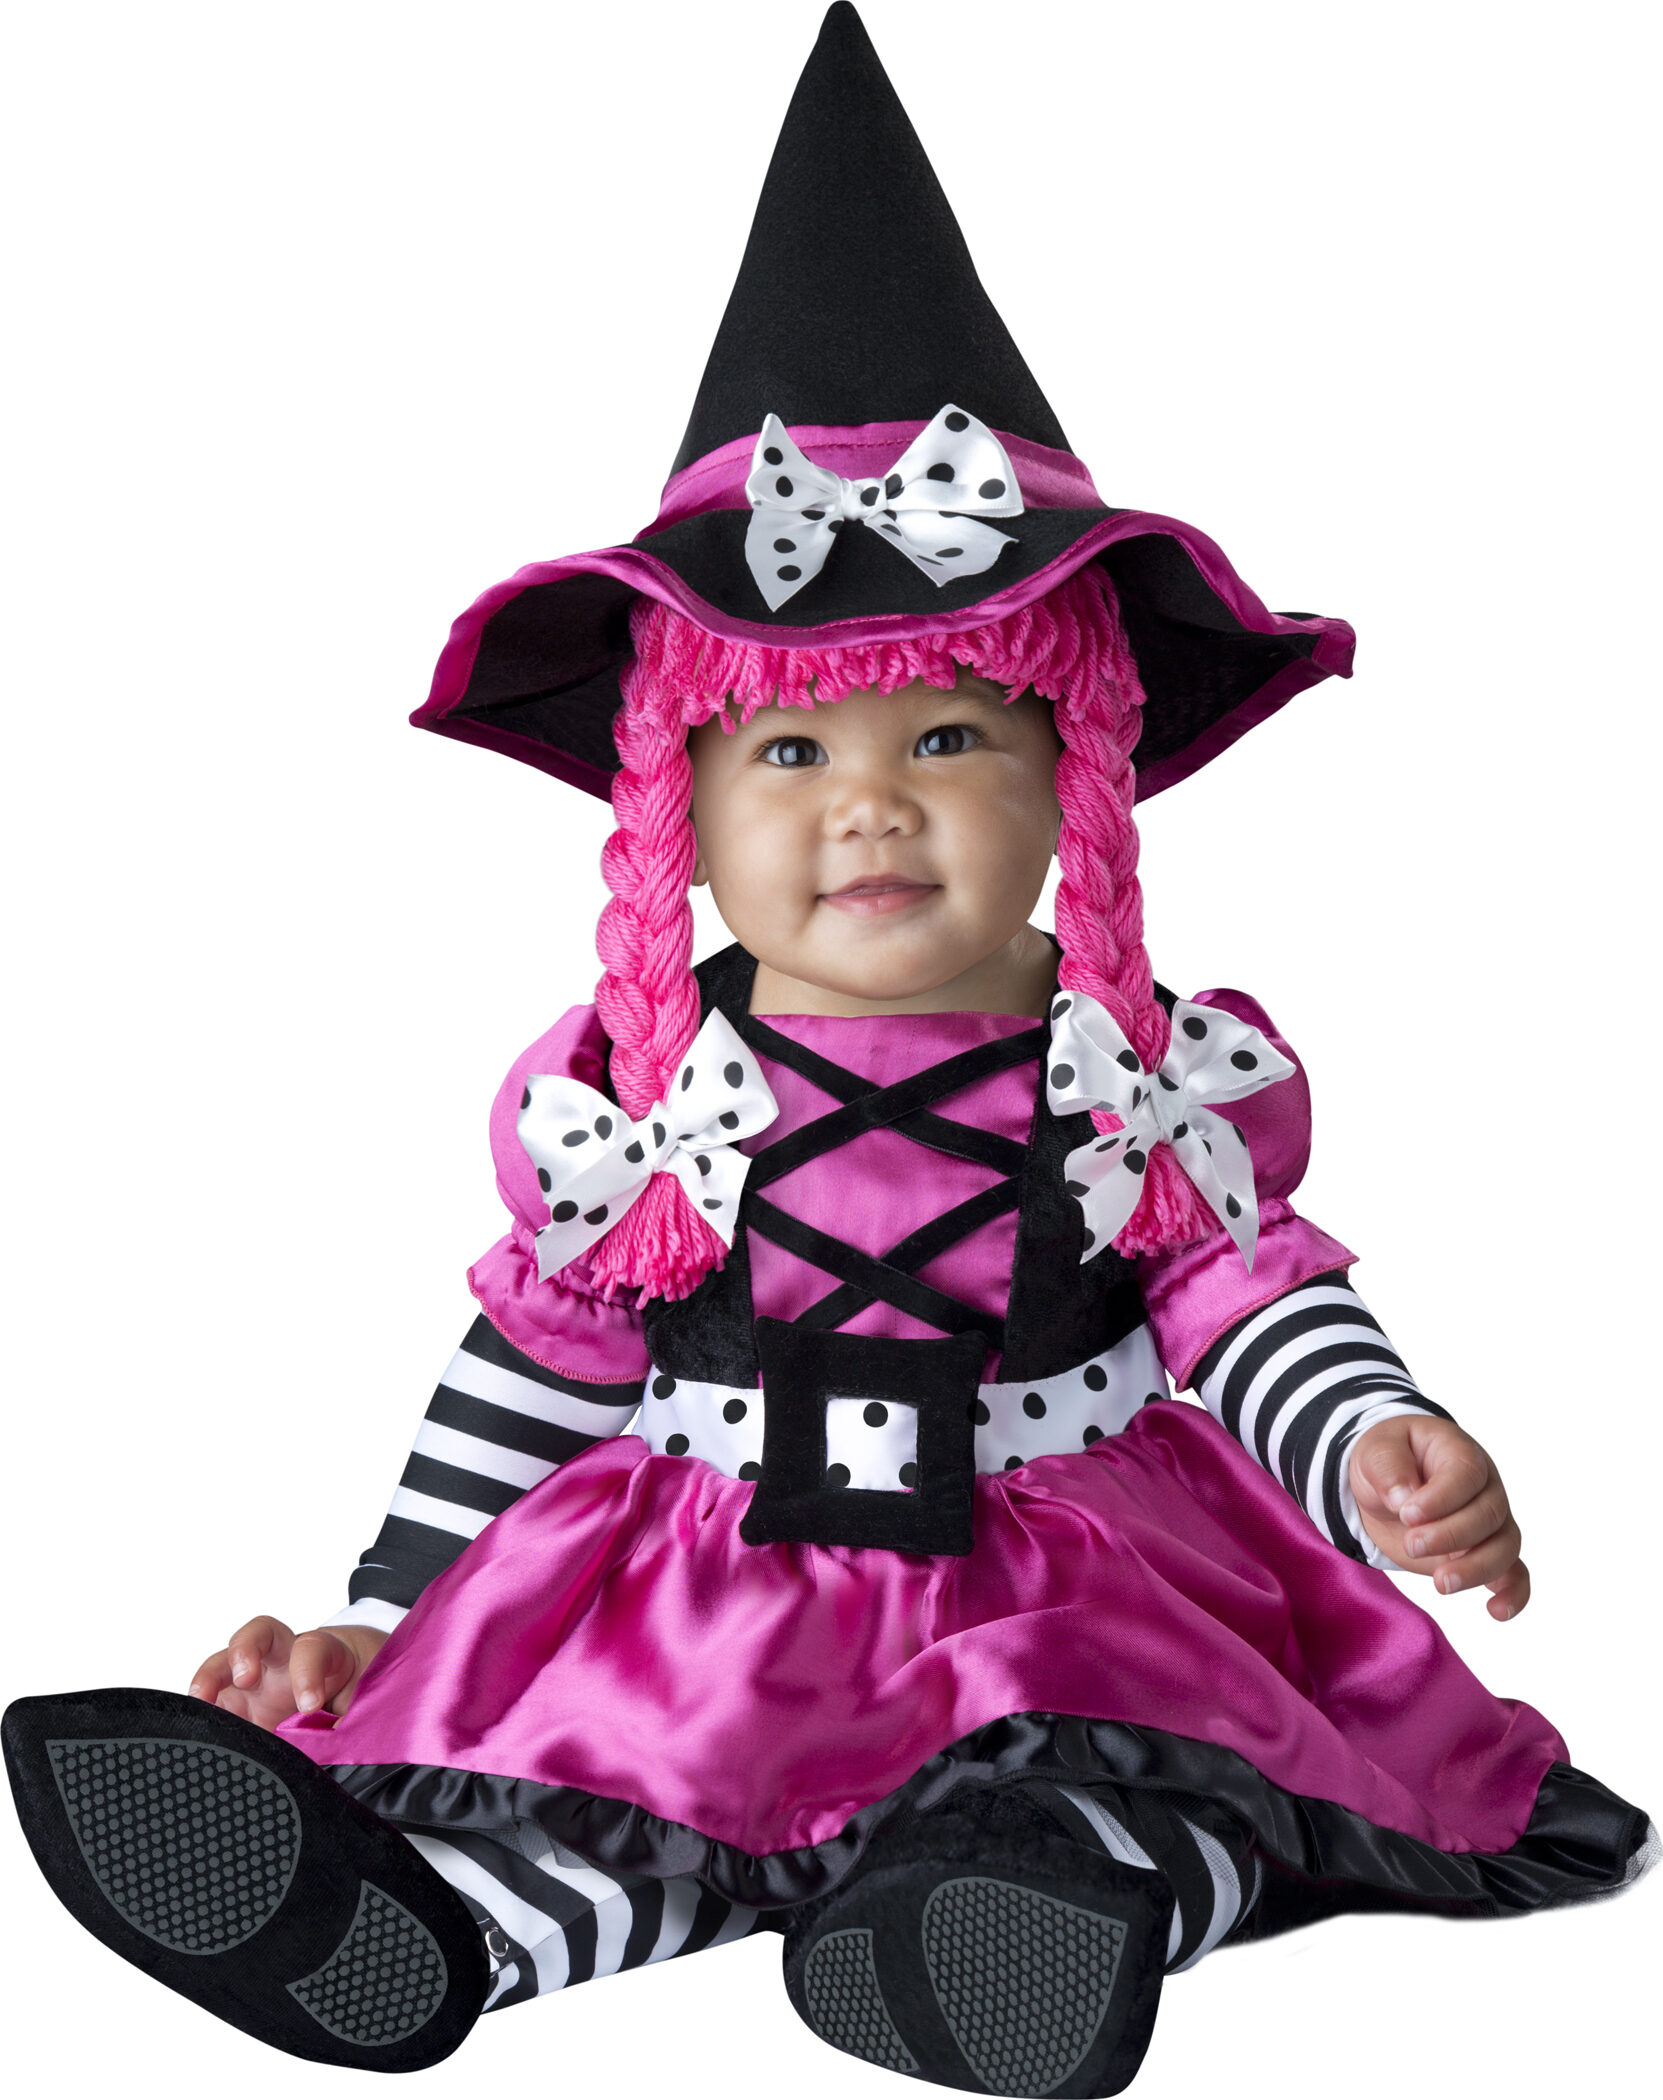 Wee Witch Baby Costume - Mr. Costumes.